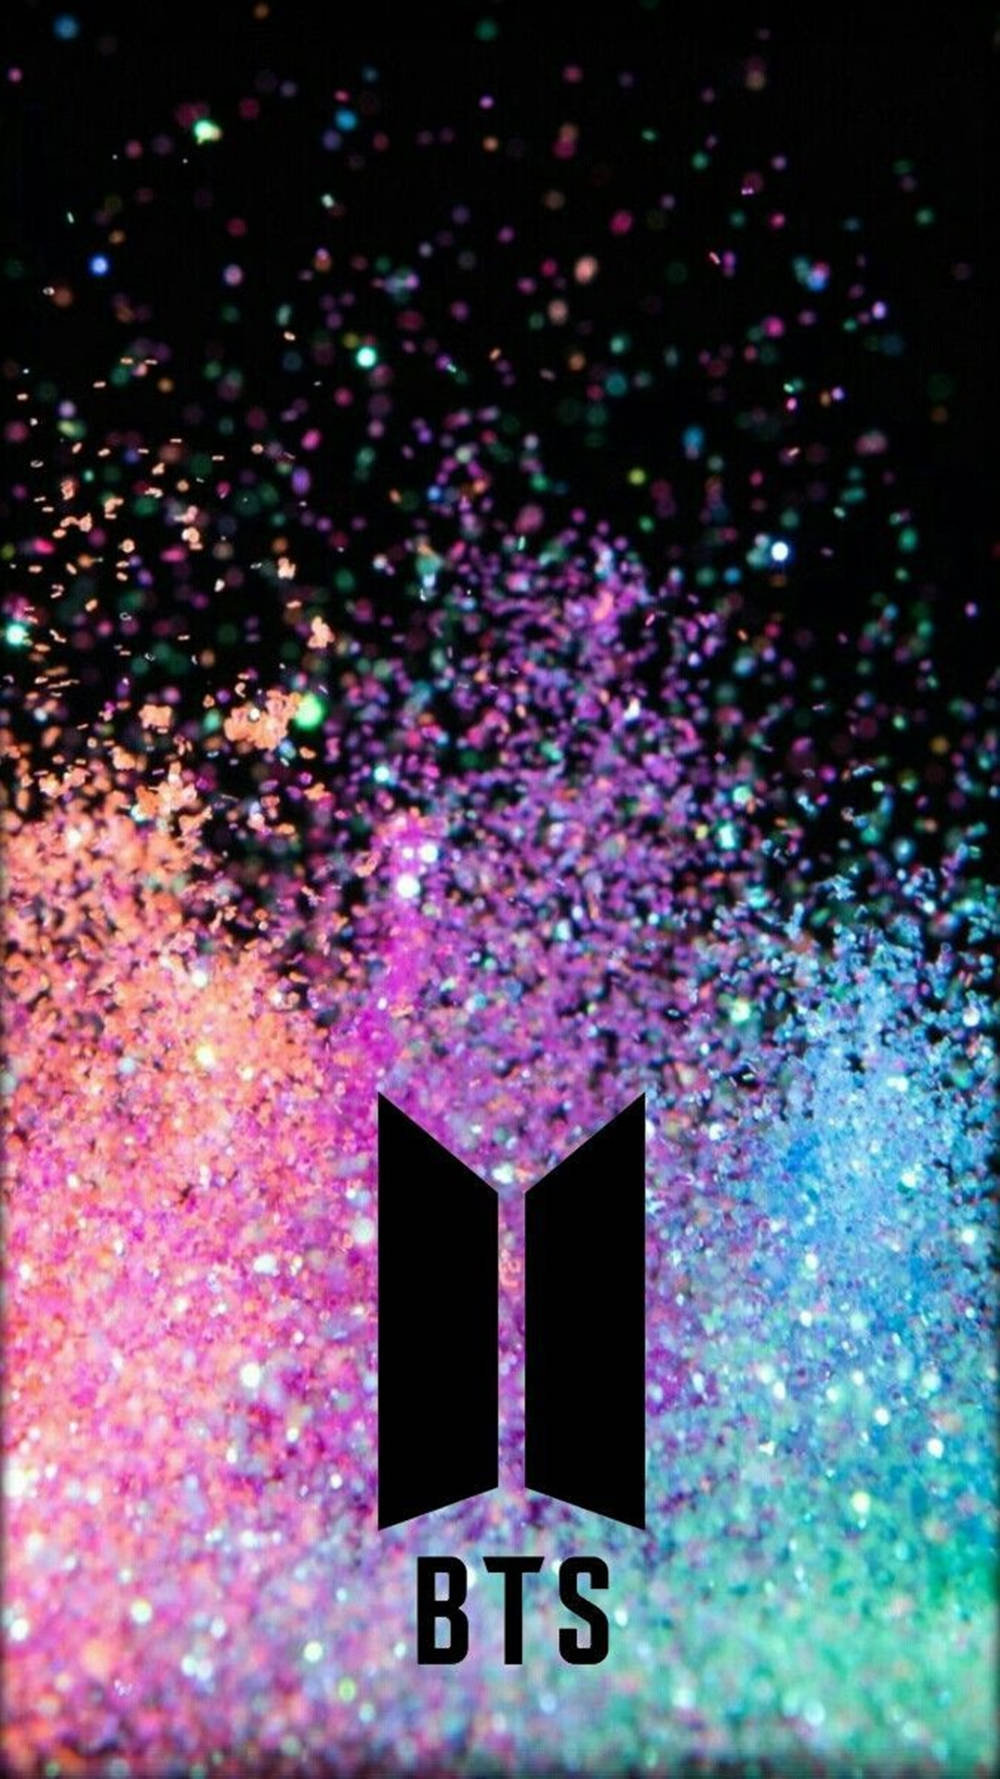 Stylish Poster For Bts Phone Background